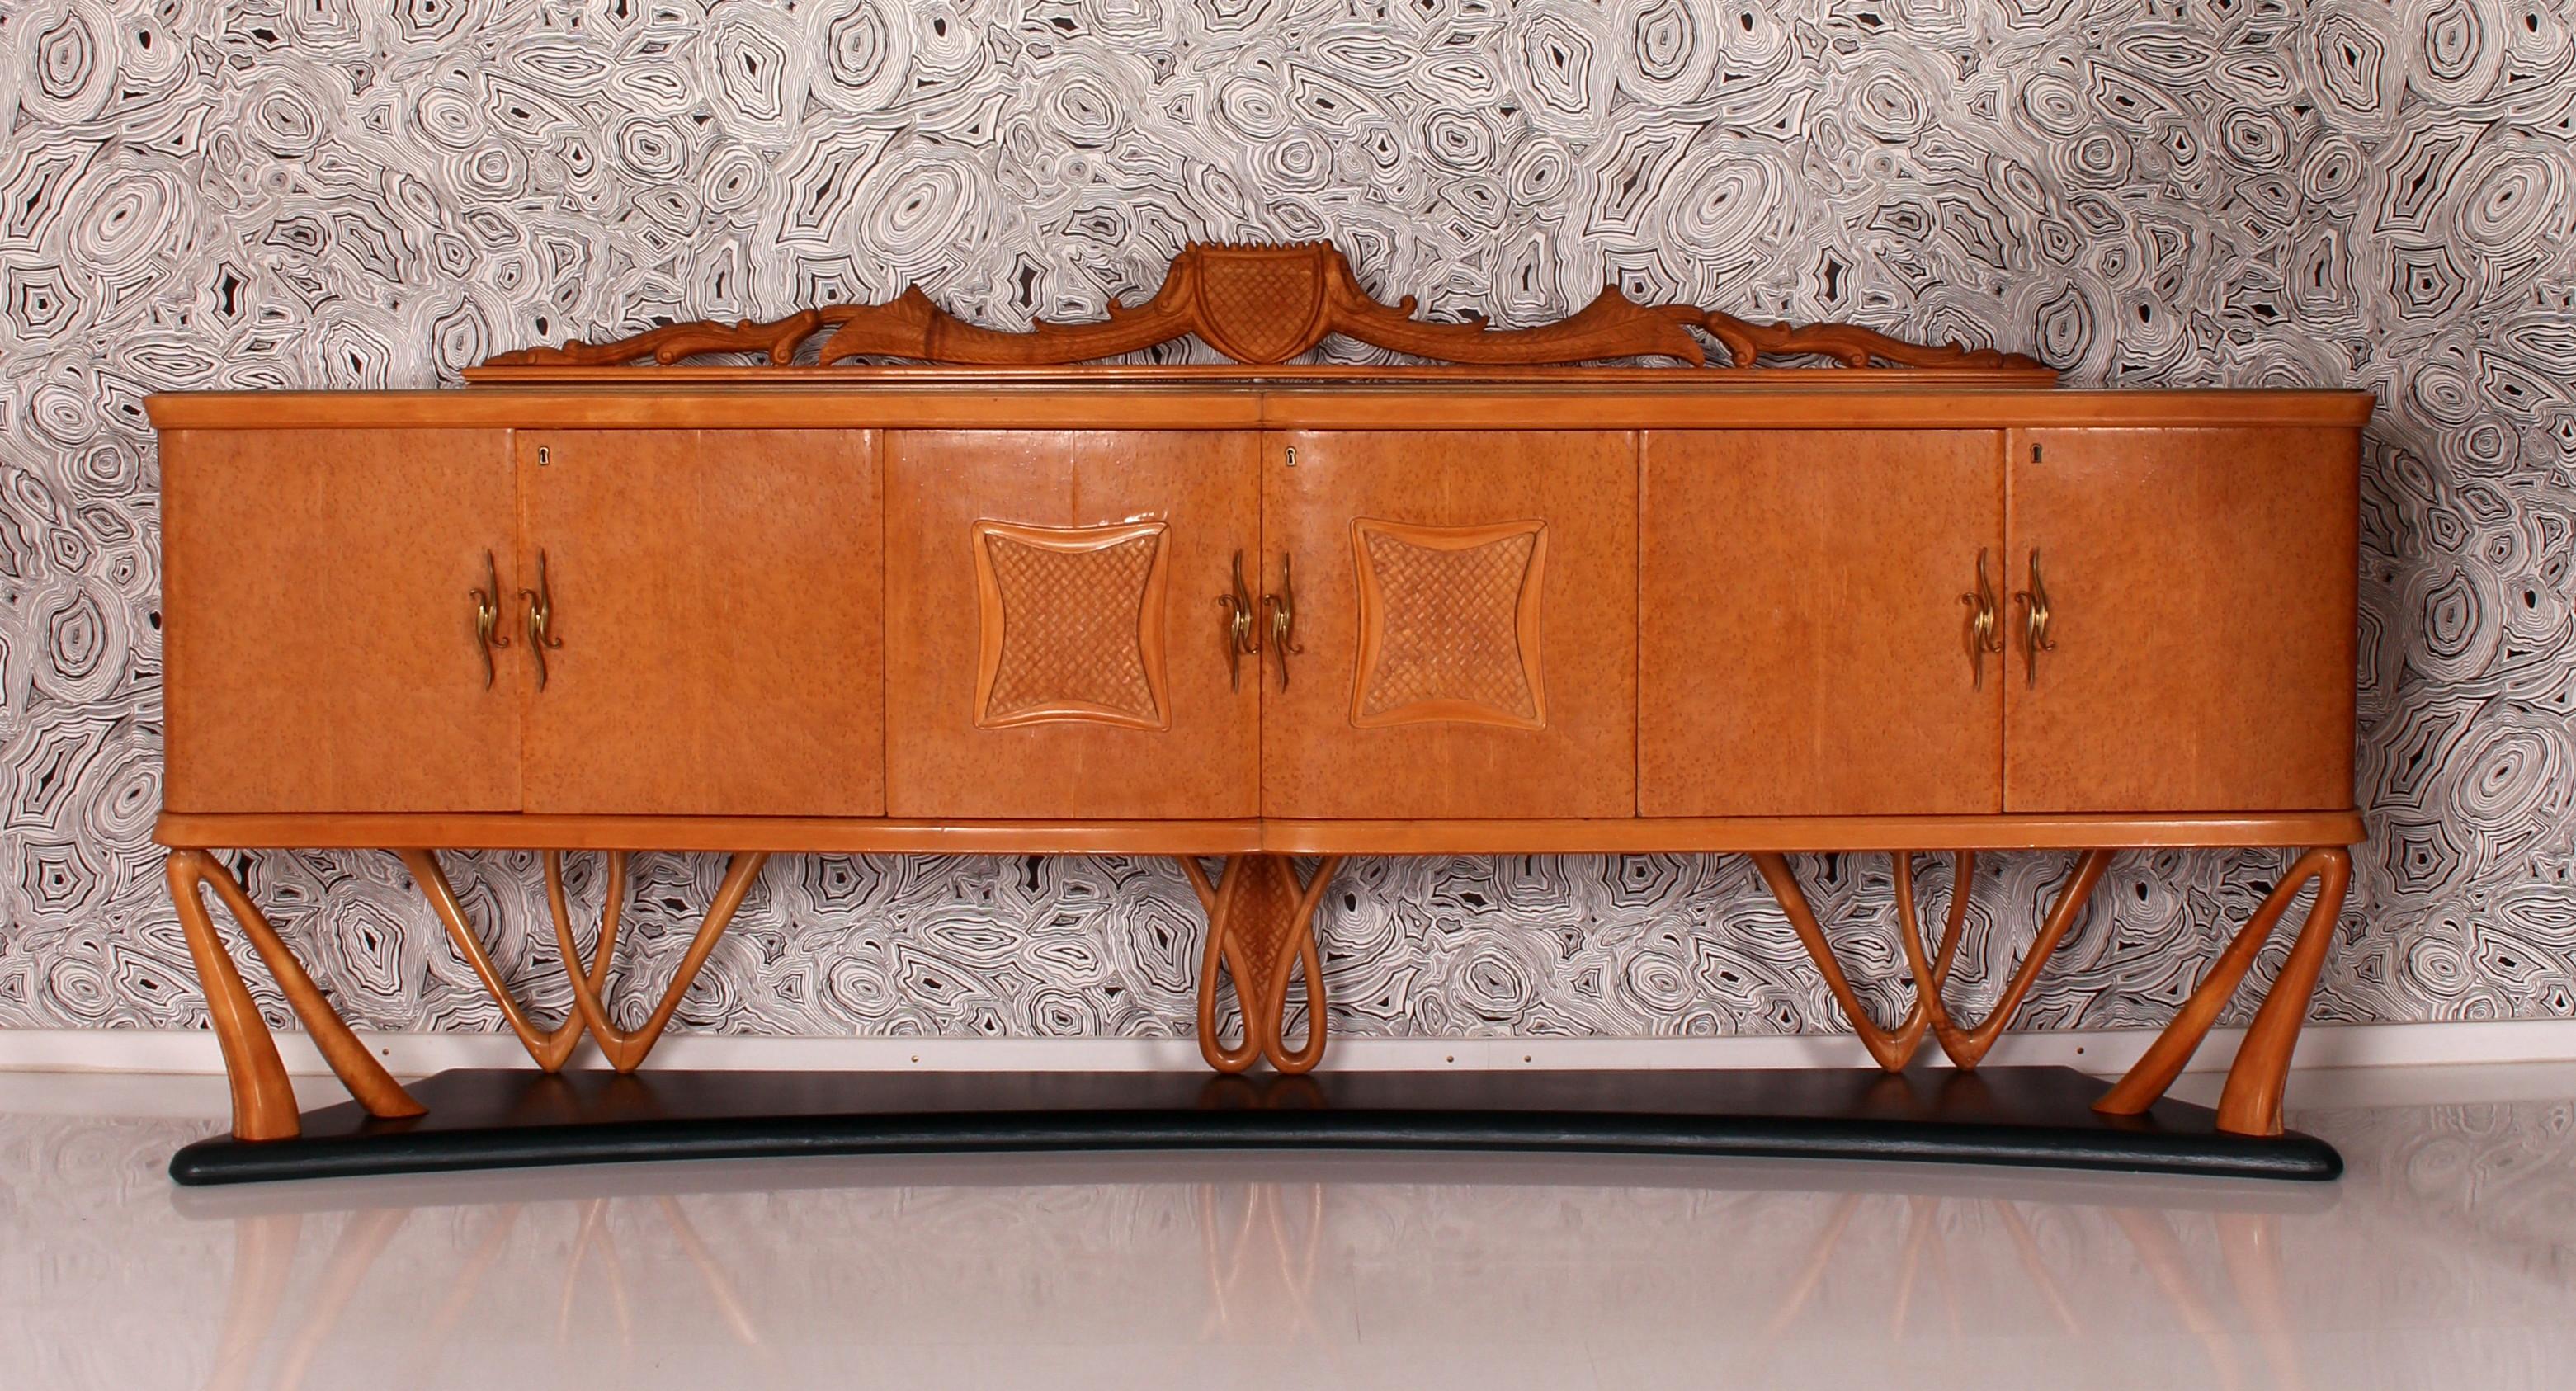 Italian 1950s
one of a kind
BAR / SIDEBOARD
attributed to Vittorio Dassi
birch root veneer - solid birch 